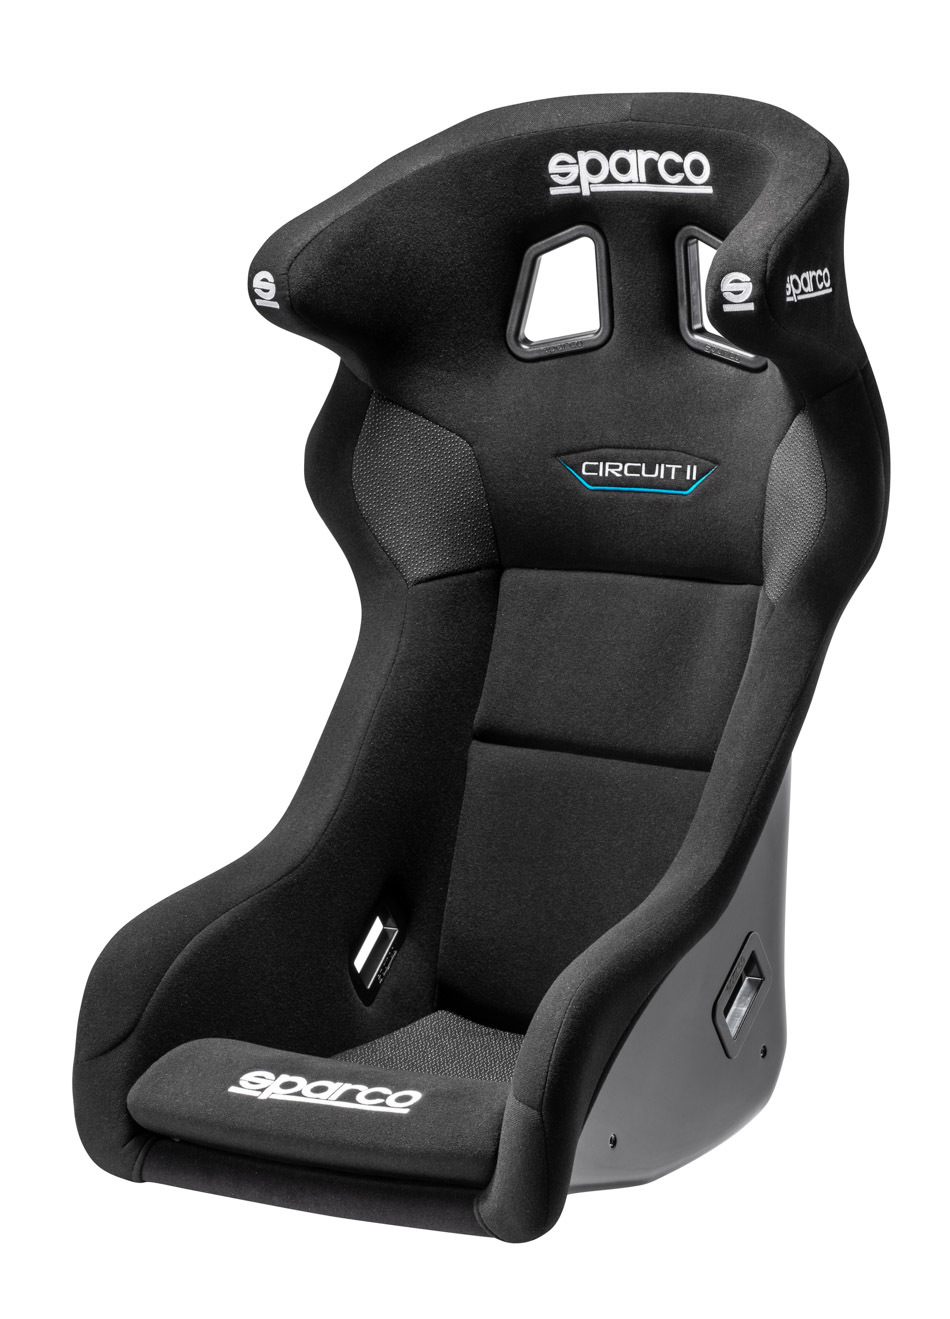 Sparco 008011RNR - Seat, Circuit II QRT, Non-Reclining, FIA Approved, Side Bolsters, Harness Openings, Fiberglass Composite, Fire-Retardant Non-Slip Fabric, Black, Each